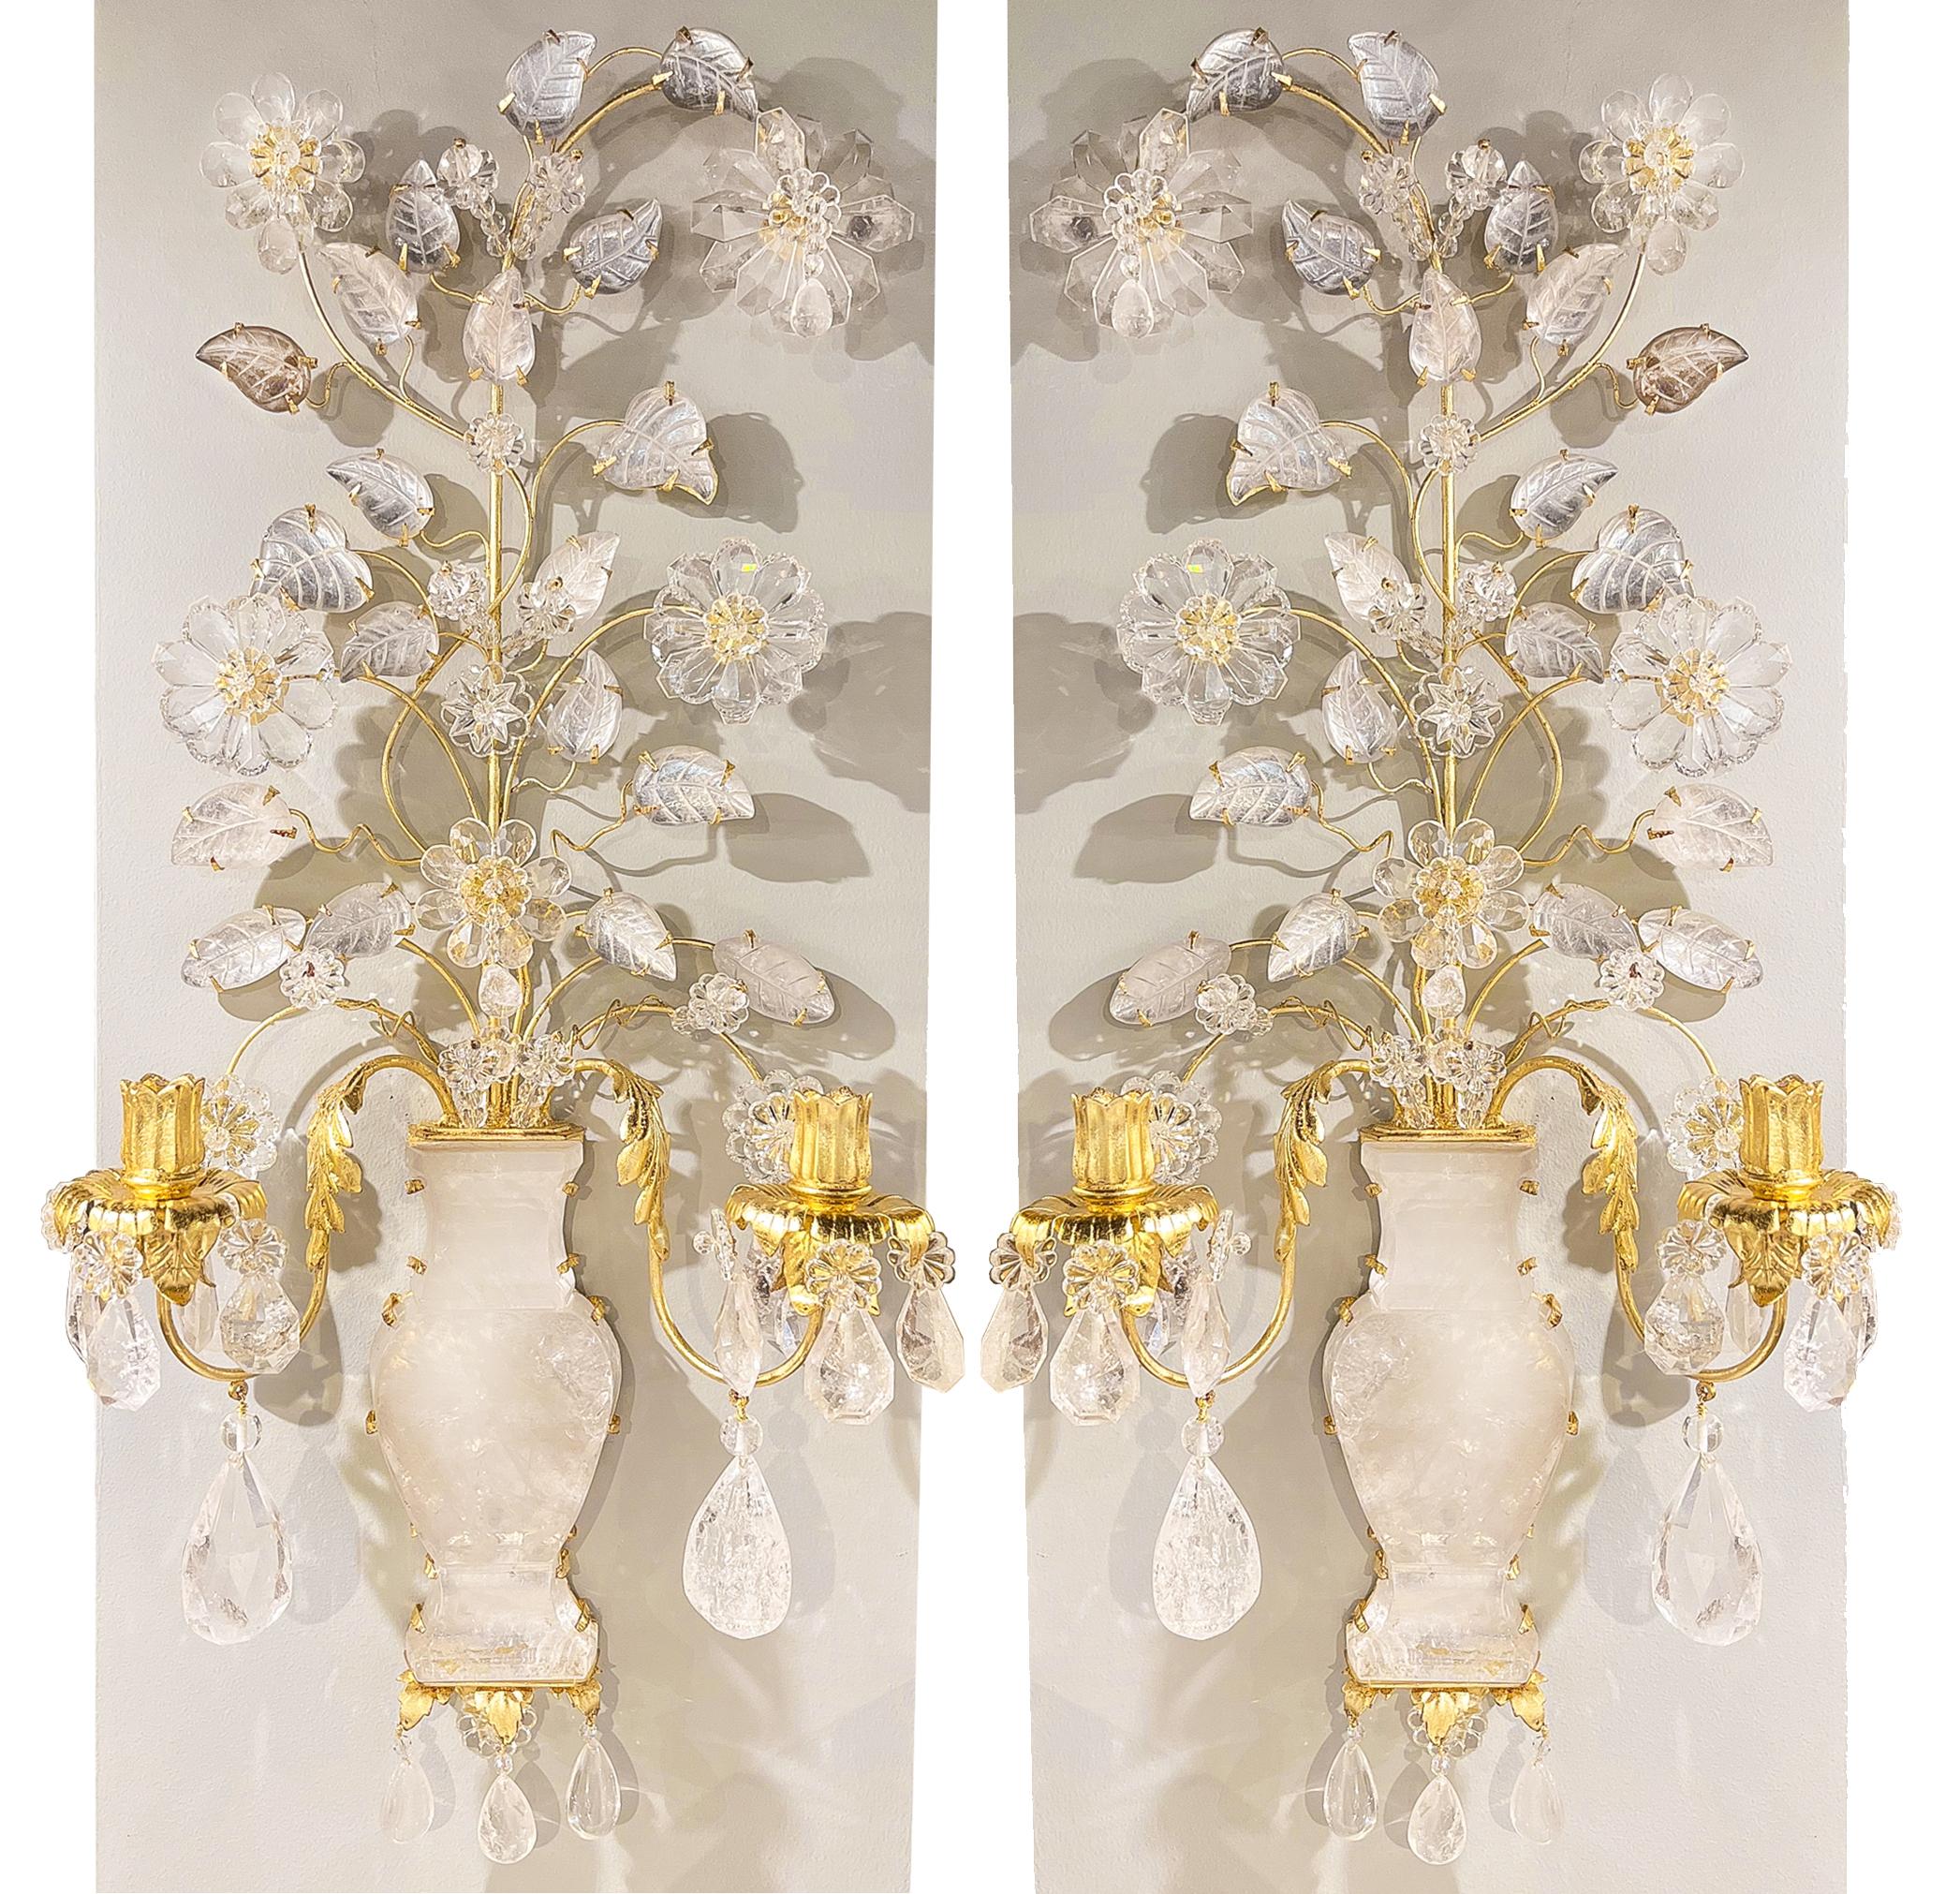 Intricately handcut and carved rock crystal sconces in the form of a vase of flowers. The main anchor of the sconce is a central bellied vase with gilt metal branches bursting from the lip. Decorative floral and leaf accents carved in rock crystal